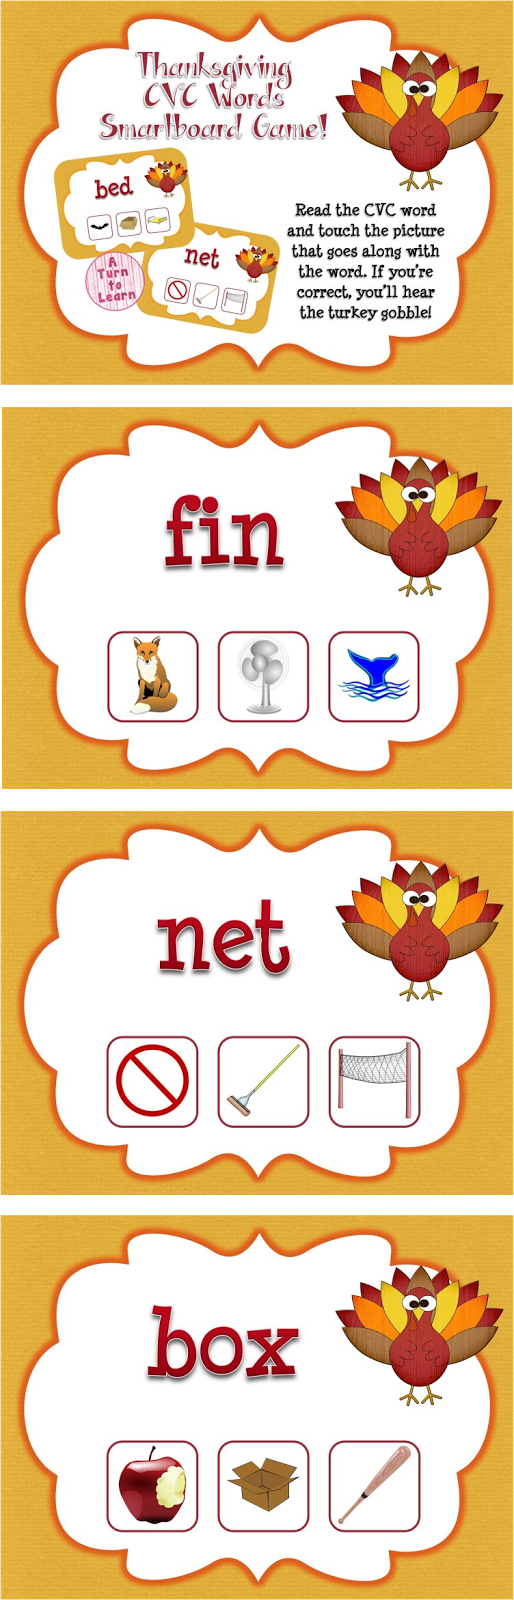  This Thanksgiving themed smartboard/promethean board game is the perfect way to celebrate the holiday! Just have students read the CVC word at the top of the page and touch the correct picture. If they're right, they'll hear a turkey gobble!